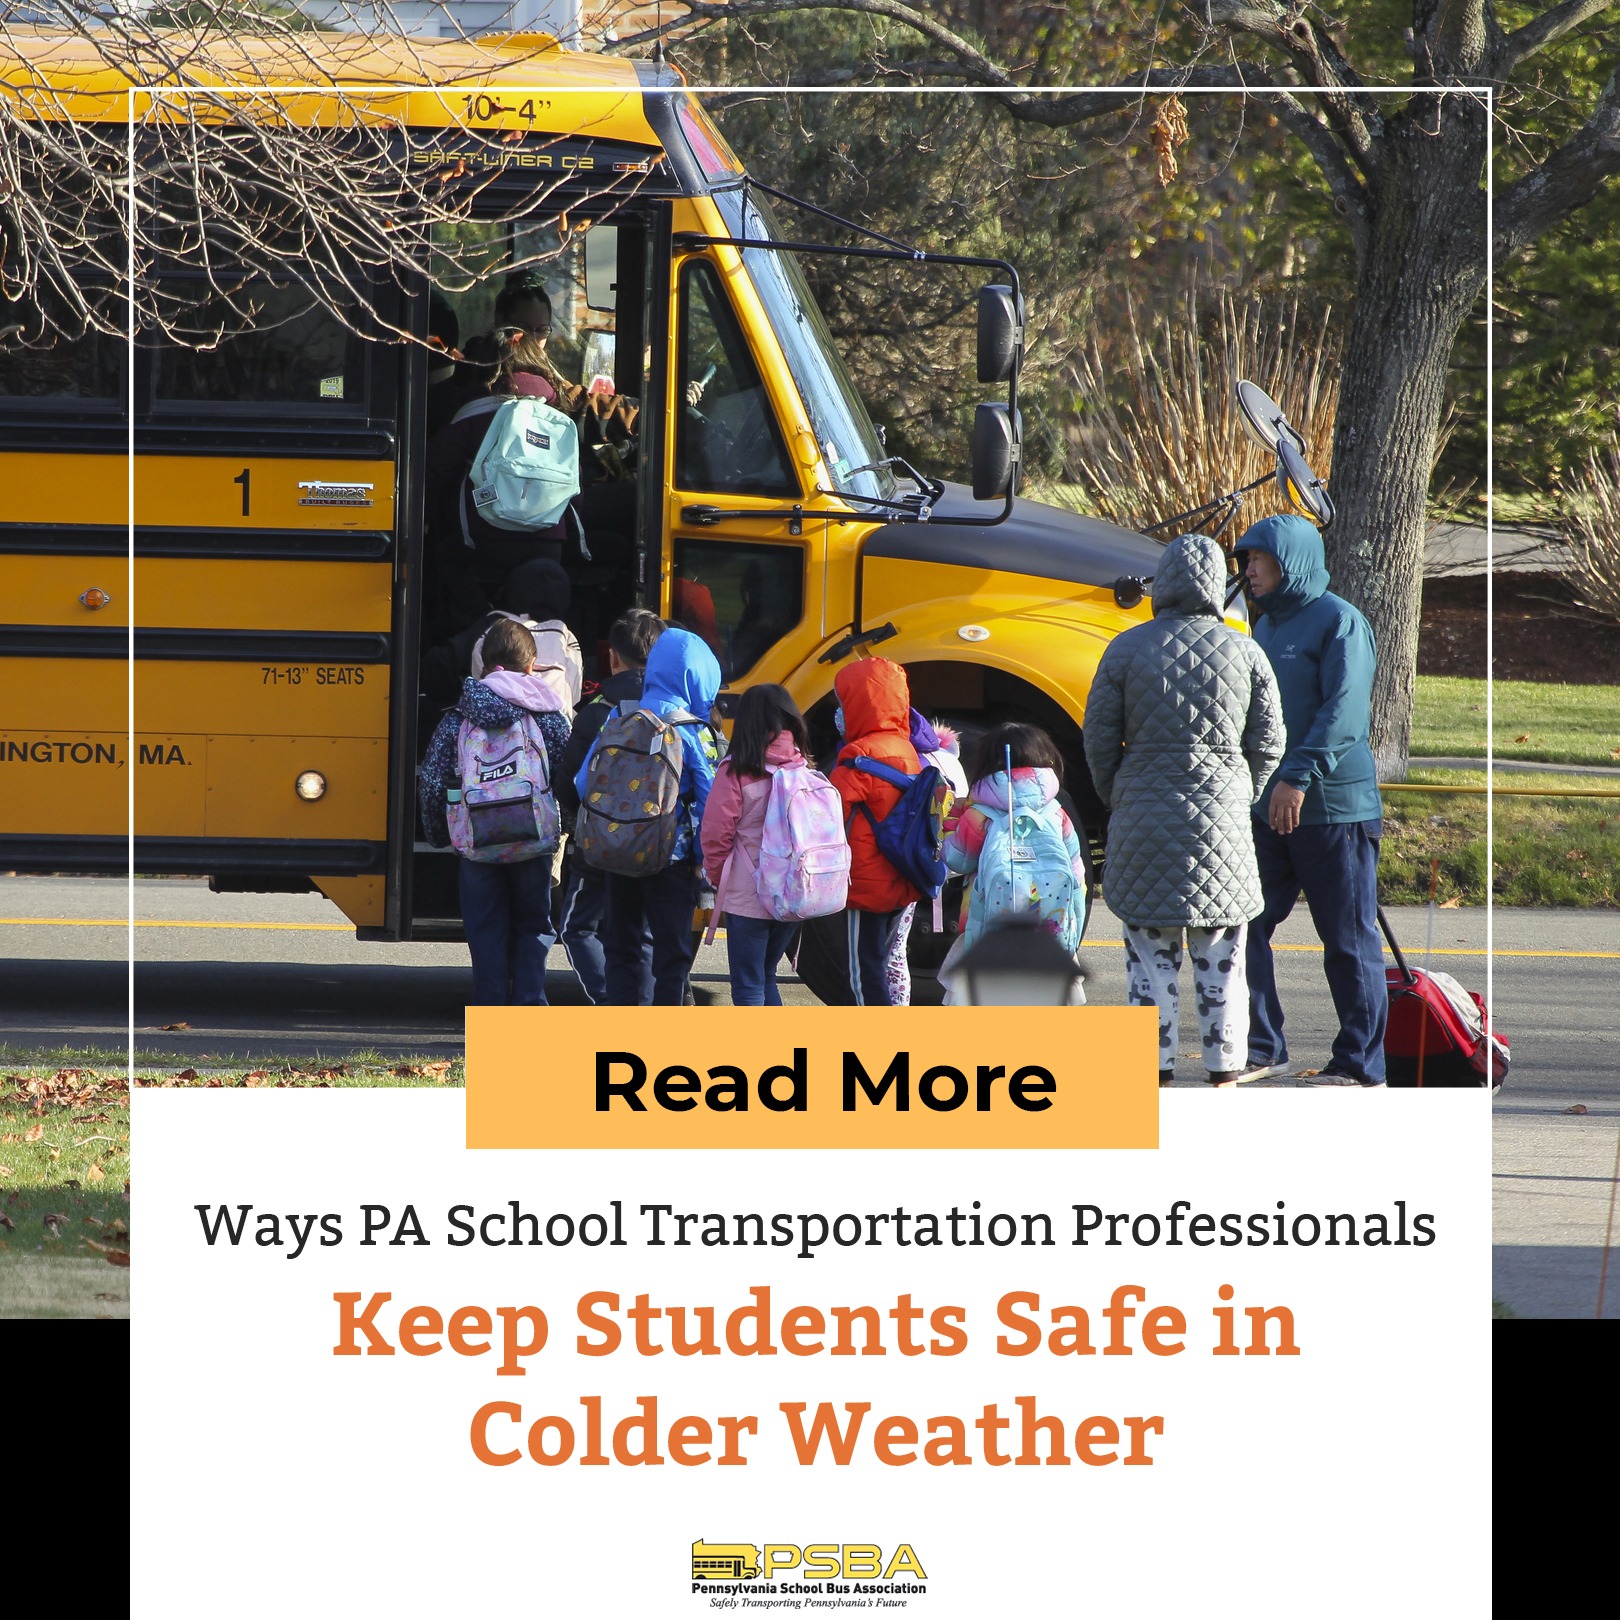 Ways PA School Transportation Professionals Keep Students Safe in Colder Weather